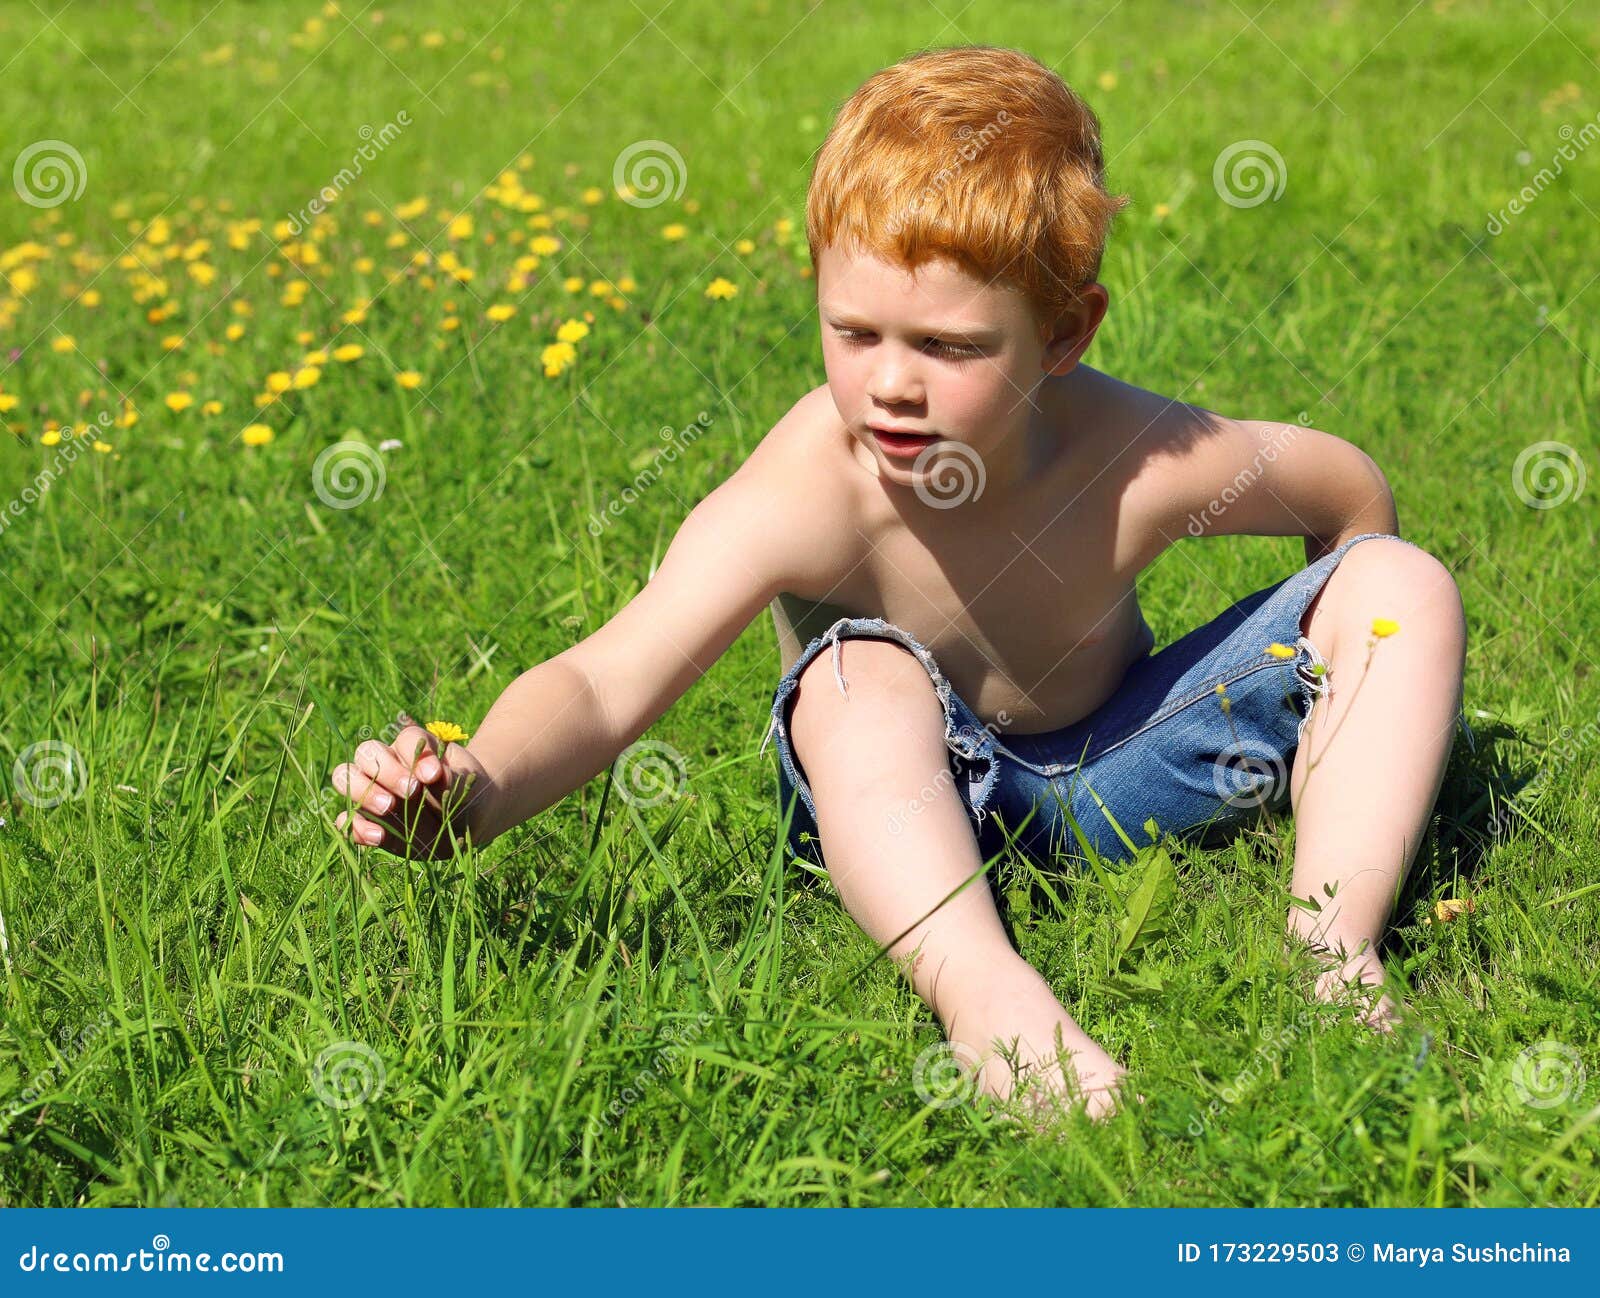 Red Hair Little Boy Examines a Yellow Flower. Happy Kid without a T ...